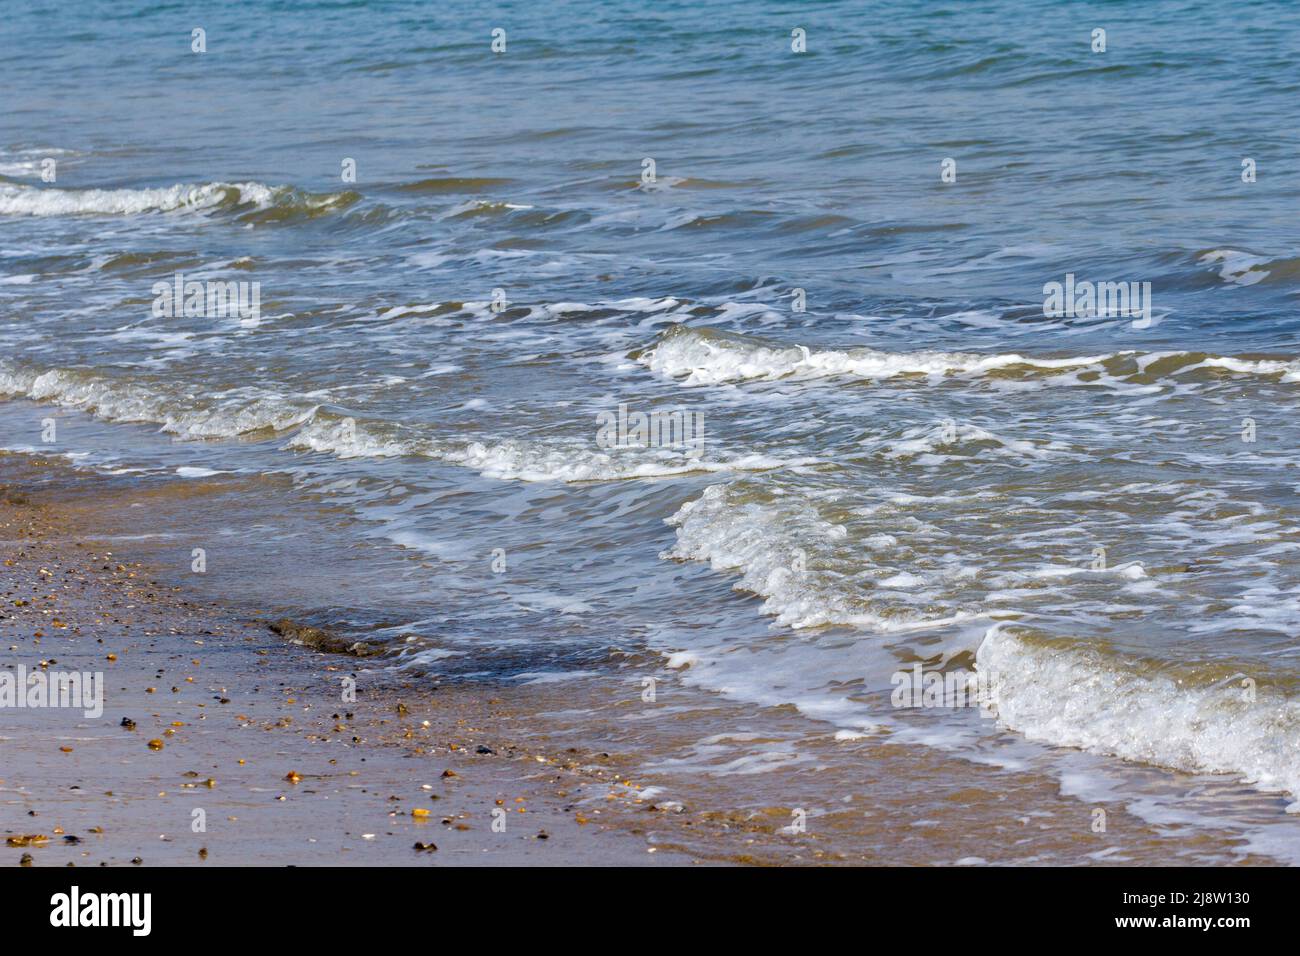 Ocean waves breaking onto a beach at Swanage, Dorset, England Stock Photo